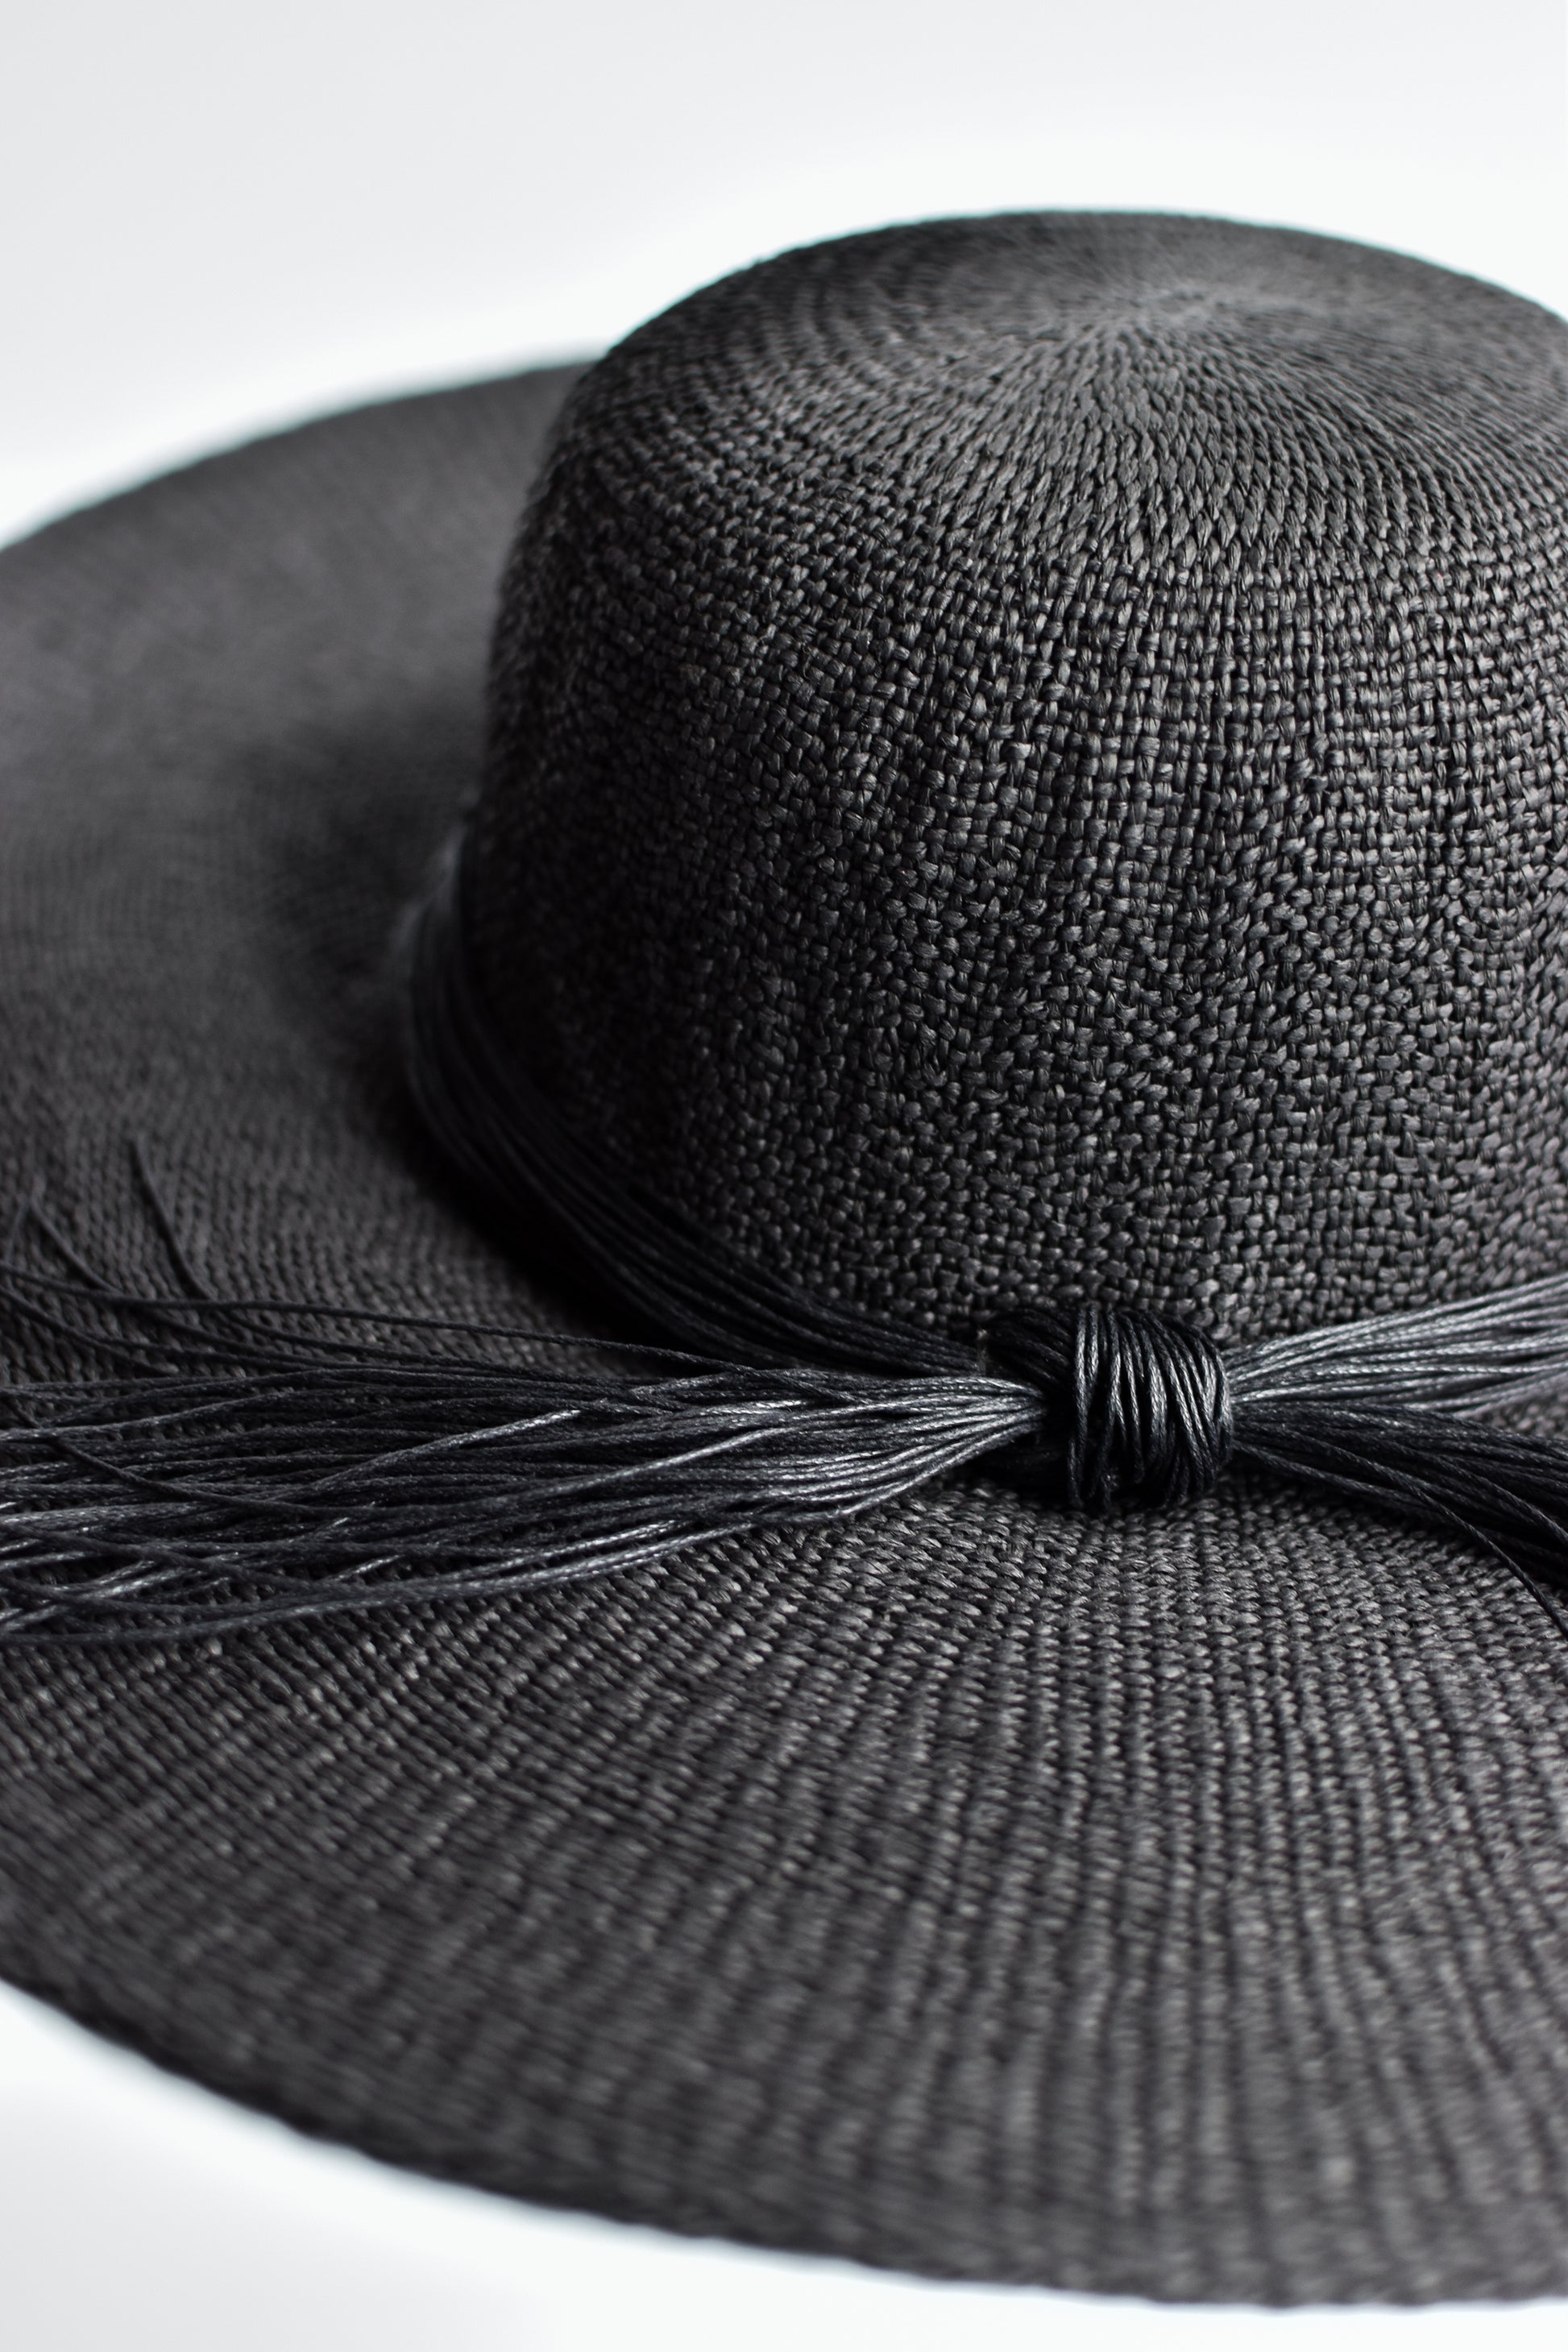 Close up of black floppy straw hat with multi-strand black cording band.